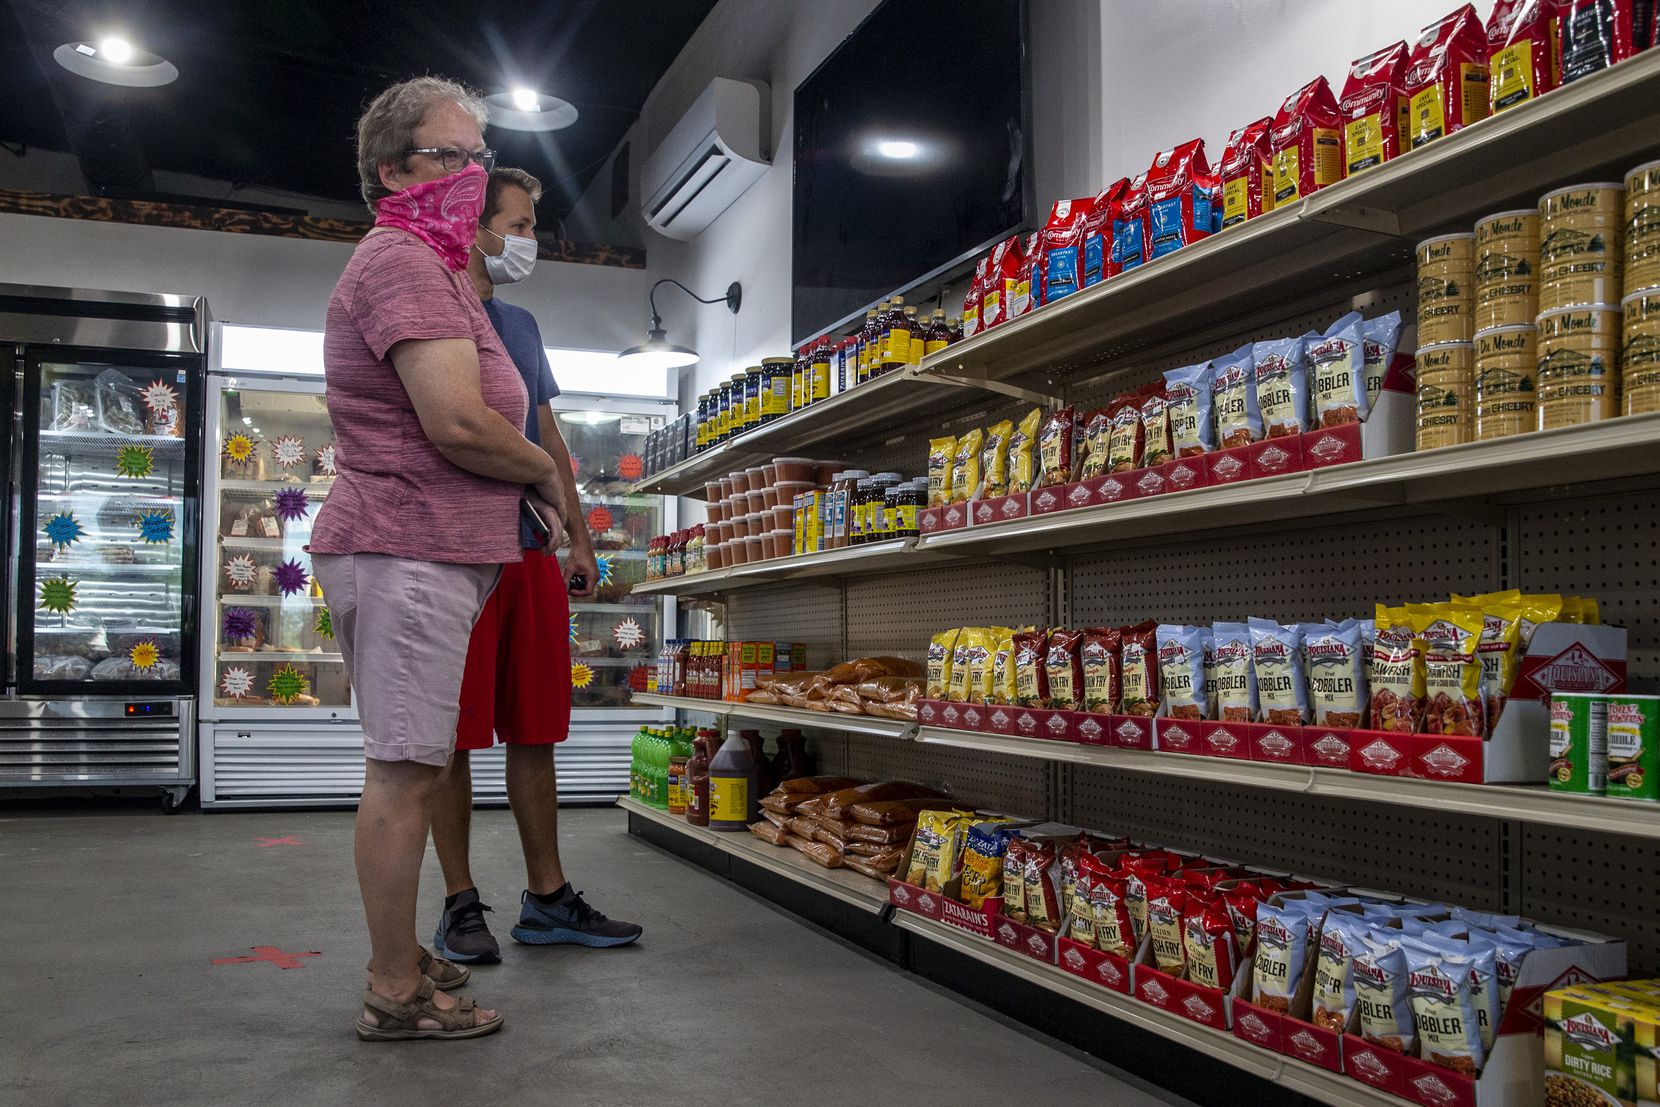 Cindy Brachey and her son, Tommy, peruse the market cajun convenience items kept in stock at...